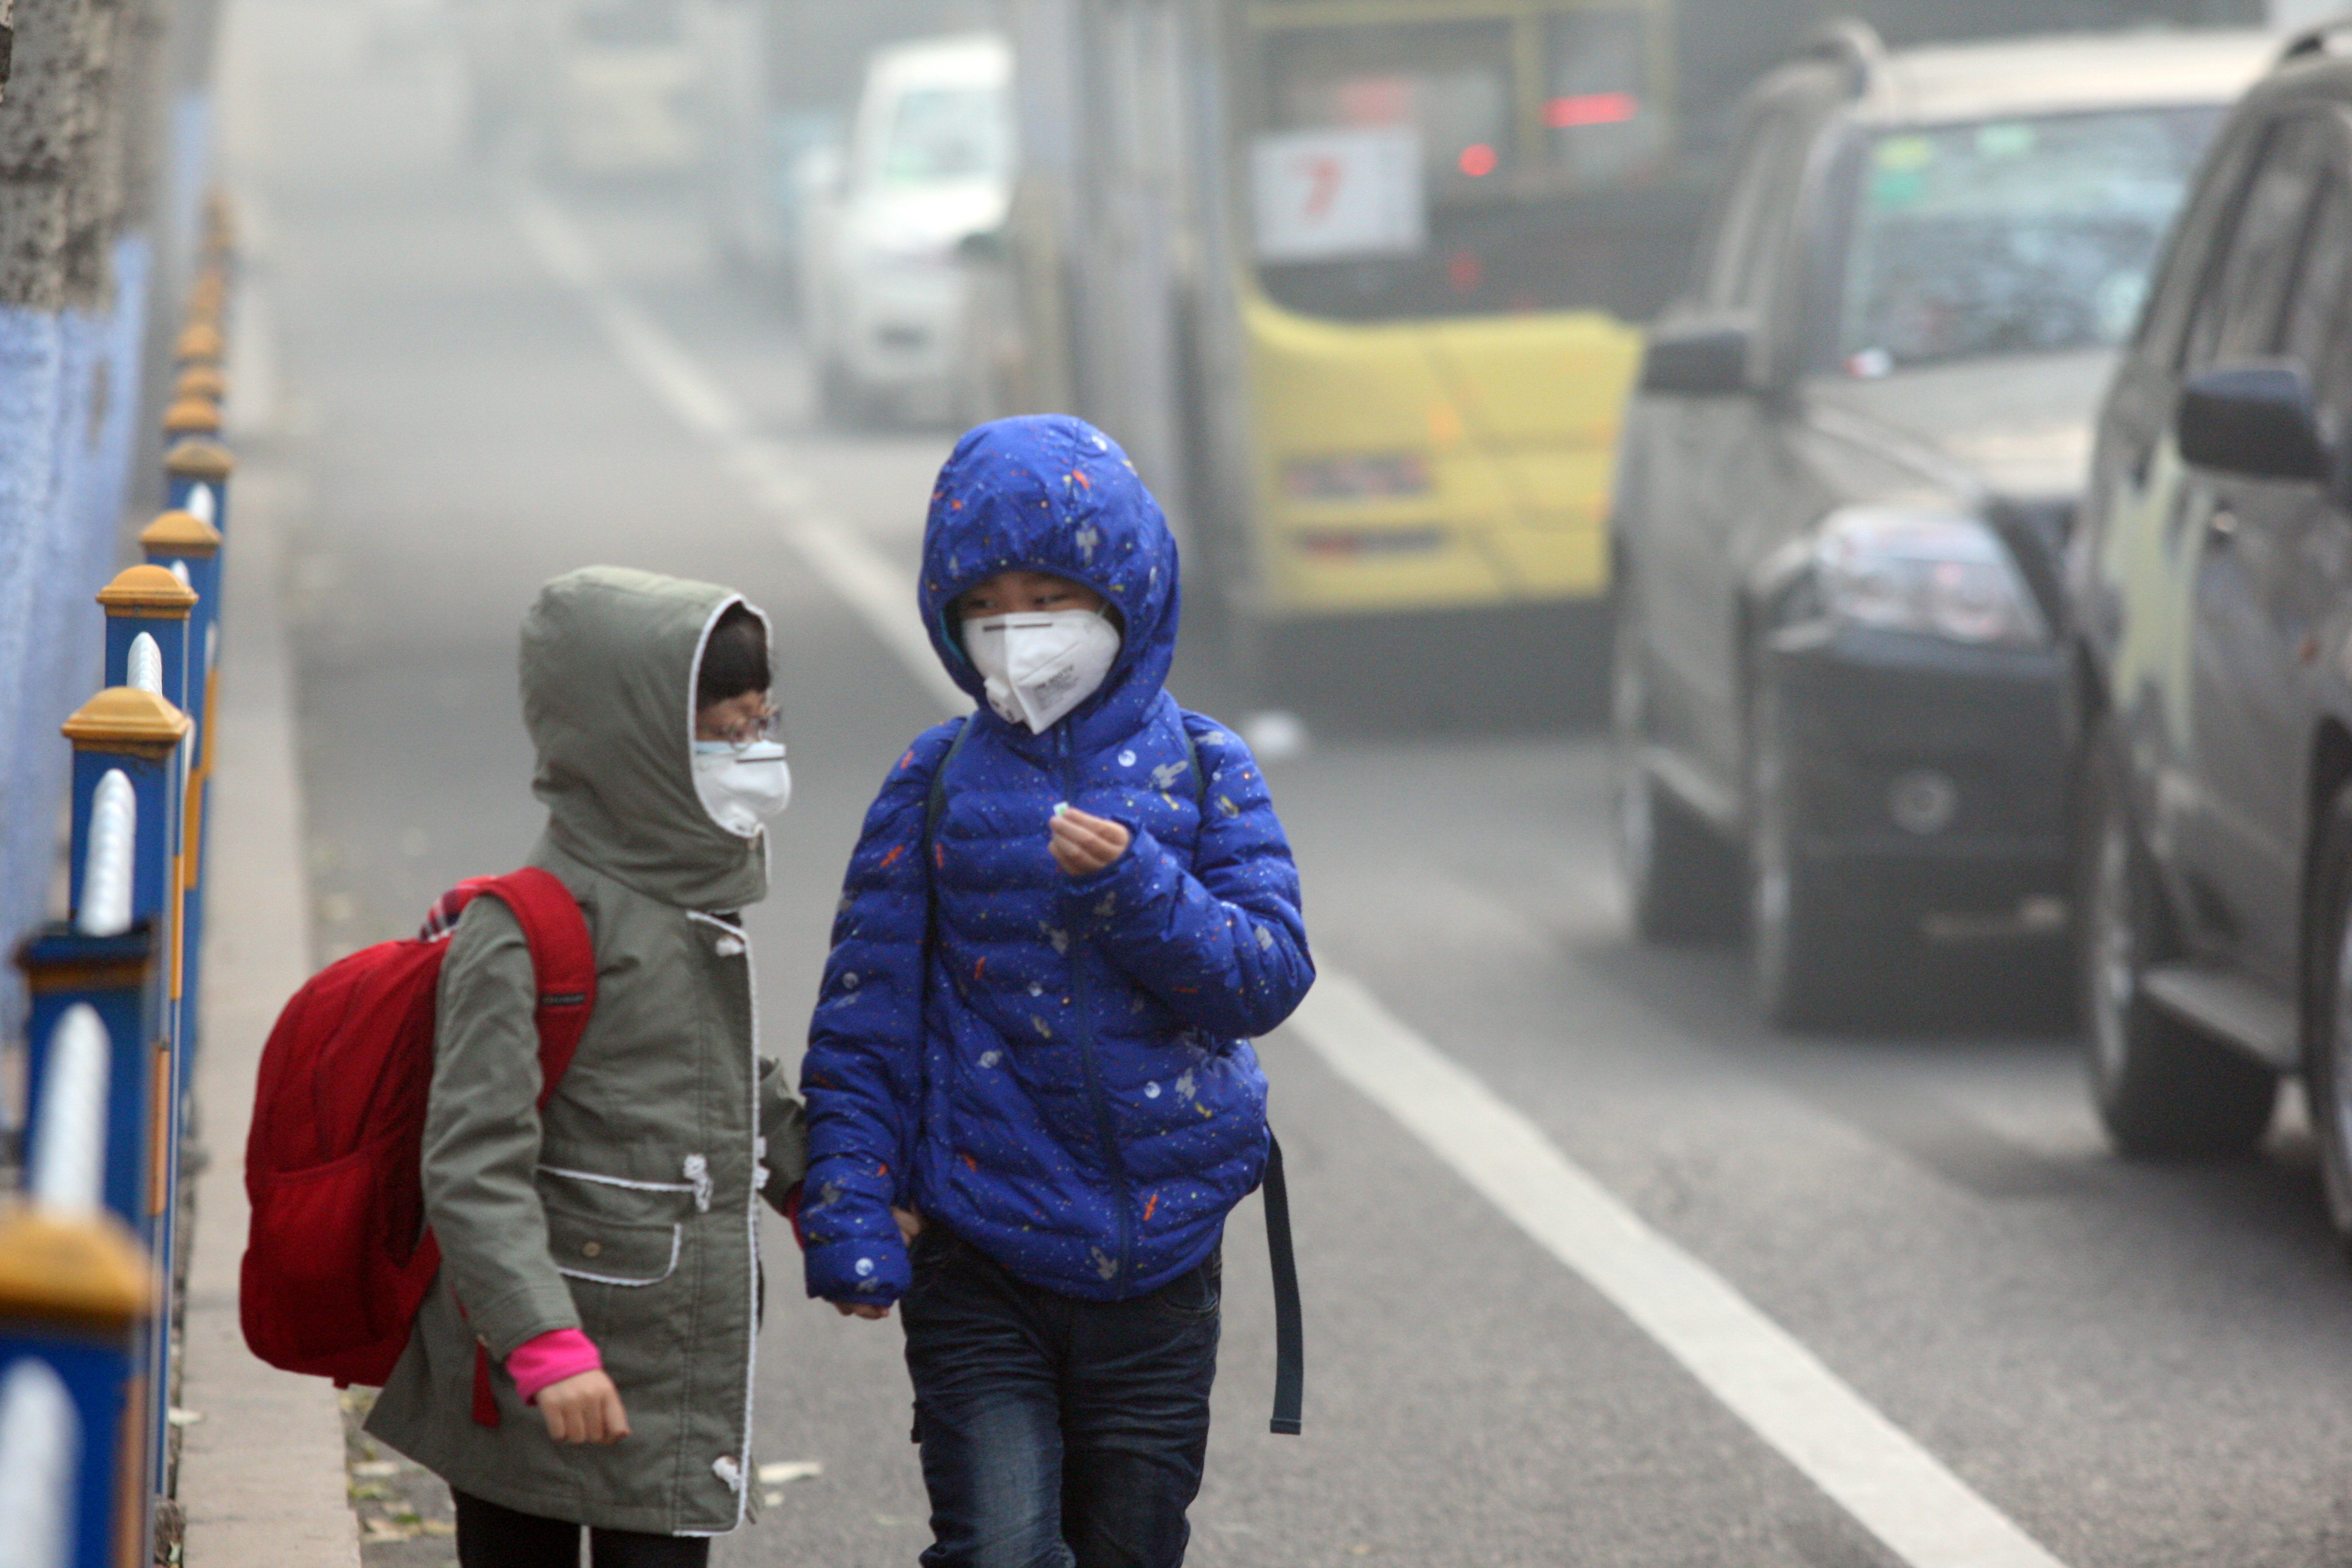 Children wearing face masks walk in heavy smog in Harbin, China on Nov. 3, 2015. (ChinaFotoPress/Getty Images)